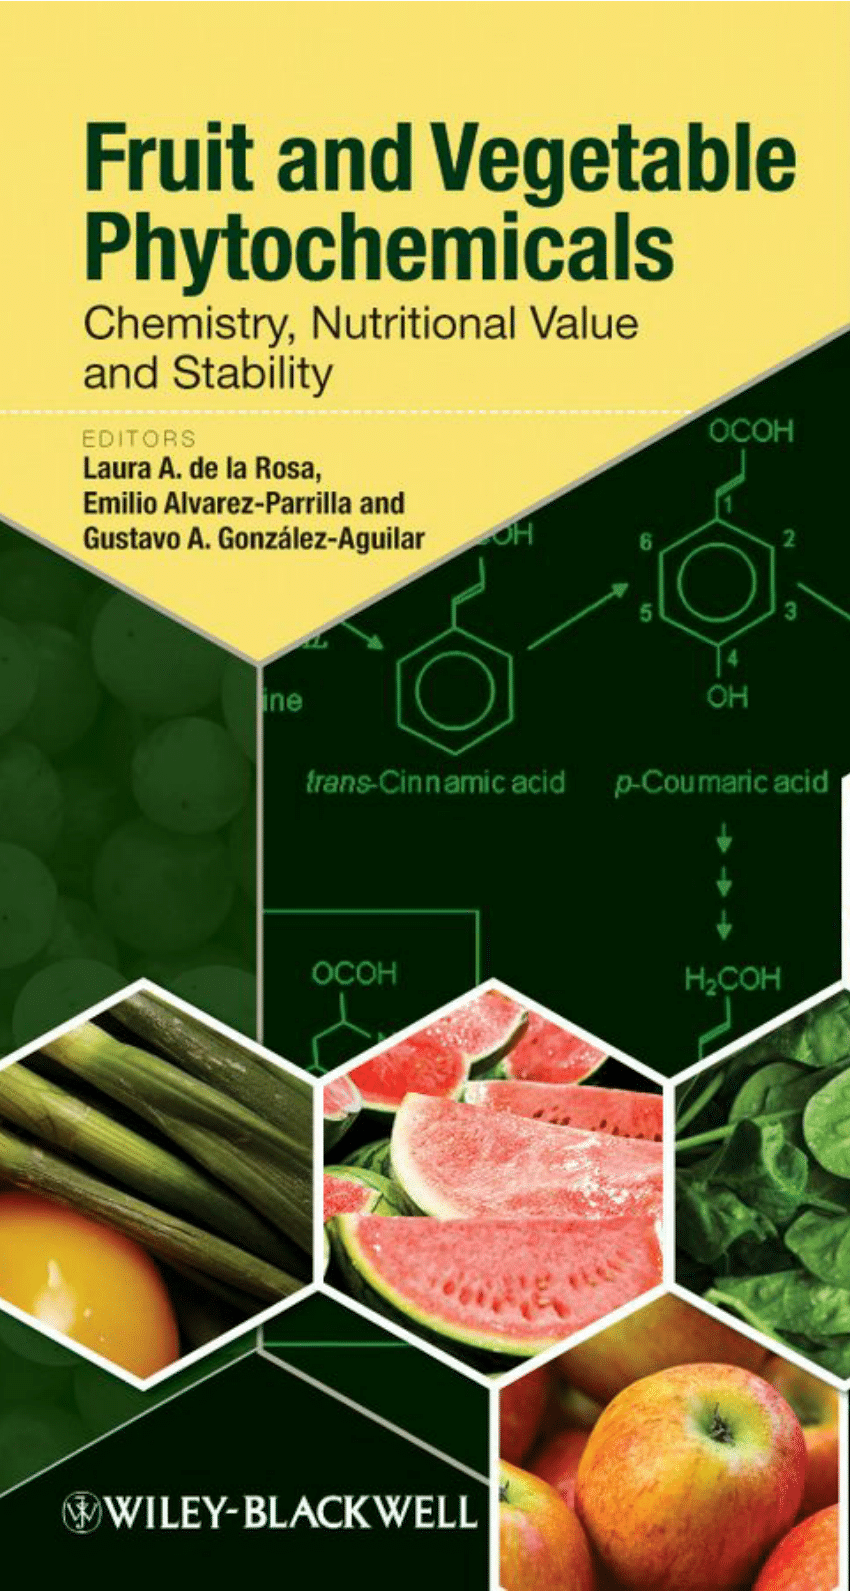 https://i1.rgstatic.net/publication/229469768_Methods_of_Analysis_of_Antioxidant_Capacity_of_Phytochemicals/links/62cd187acab7ba7426e6b664/largepreview.png